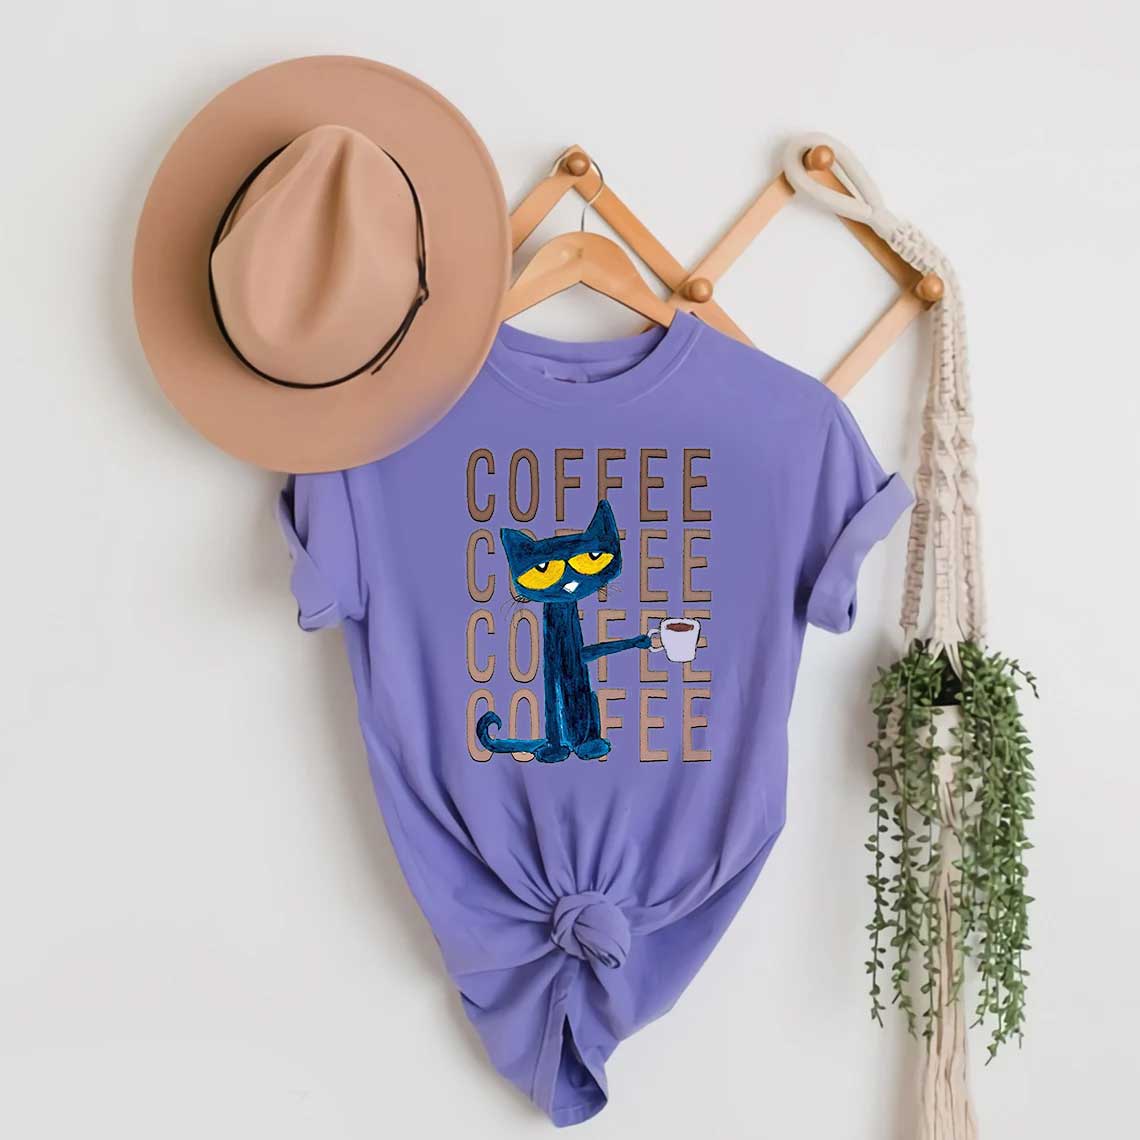 Personalized Pete The Cat Coffee Shirt, Groovy Shirt, Pete The Cat Party Shirt, Custom Name And Age Shirt, funny cat shirt, Pete The Cat fan gift